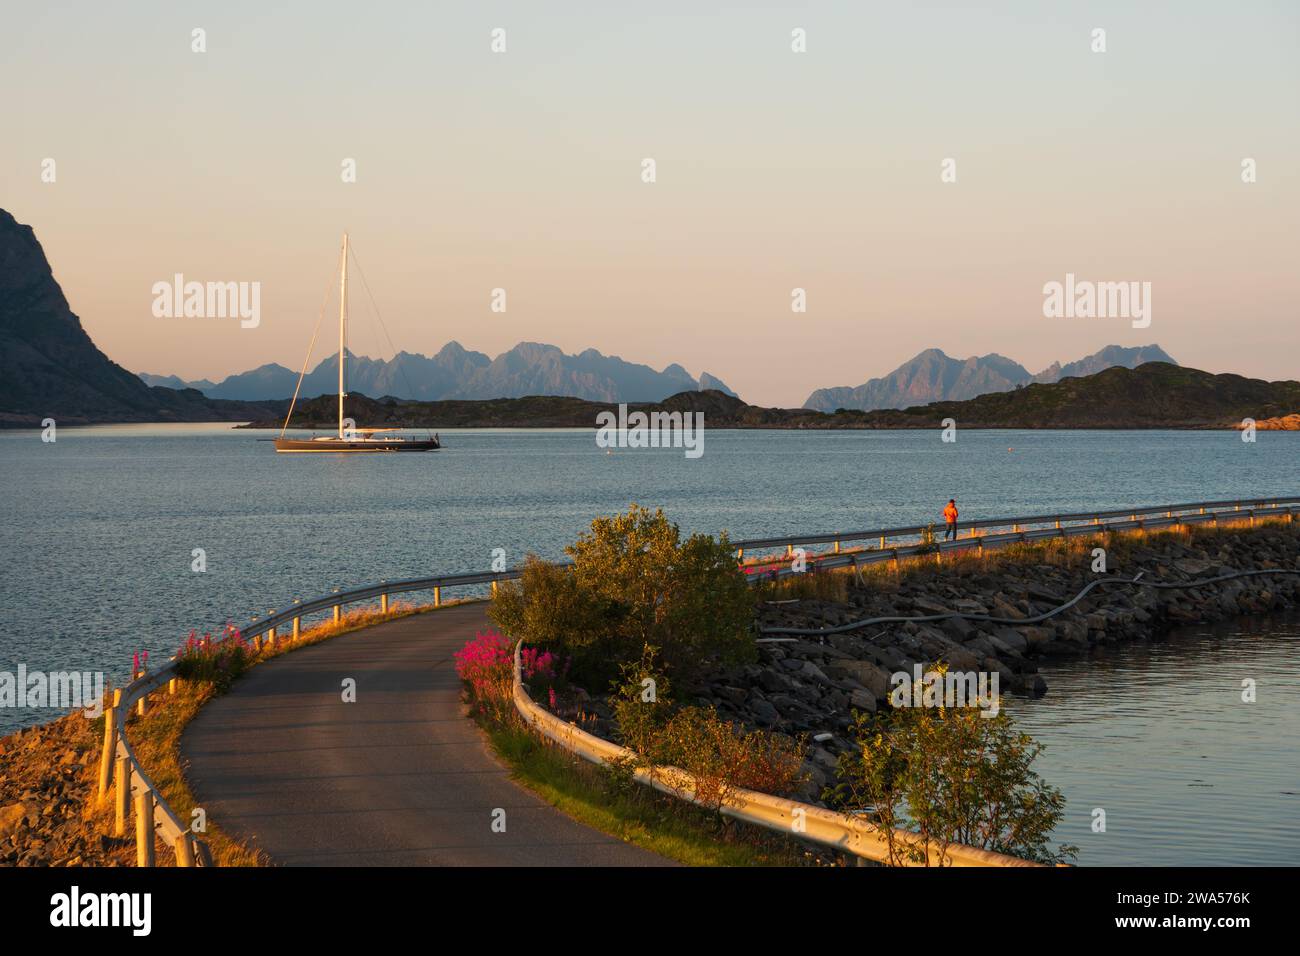 Sailboat near Henningsvaer, Lofoten, Norway in the midnight sun, man walking on a road in low sunlight. Sea and mountains, clear sunset sky. Stock Photo